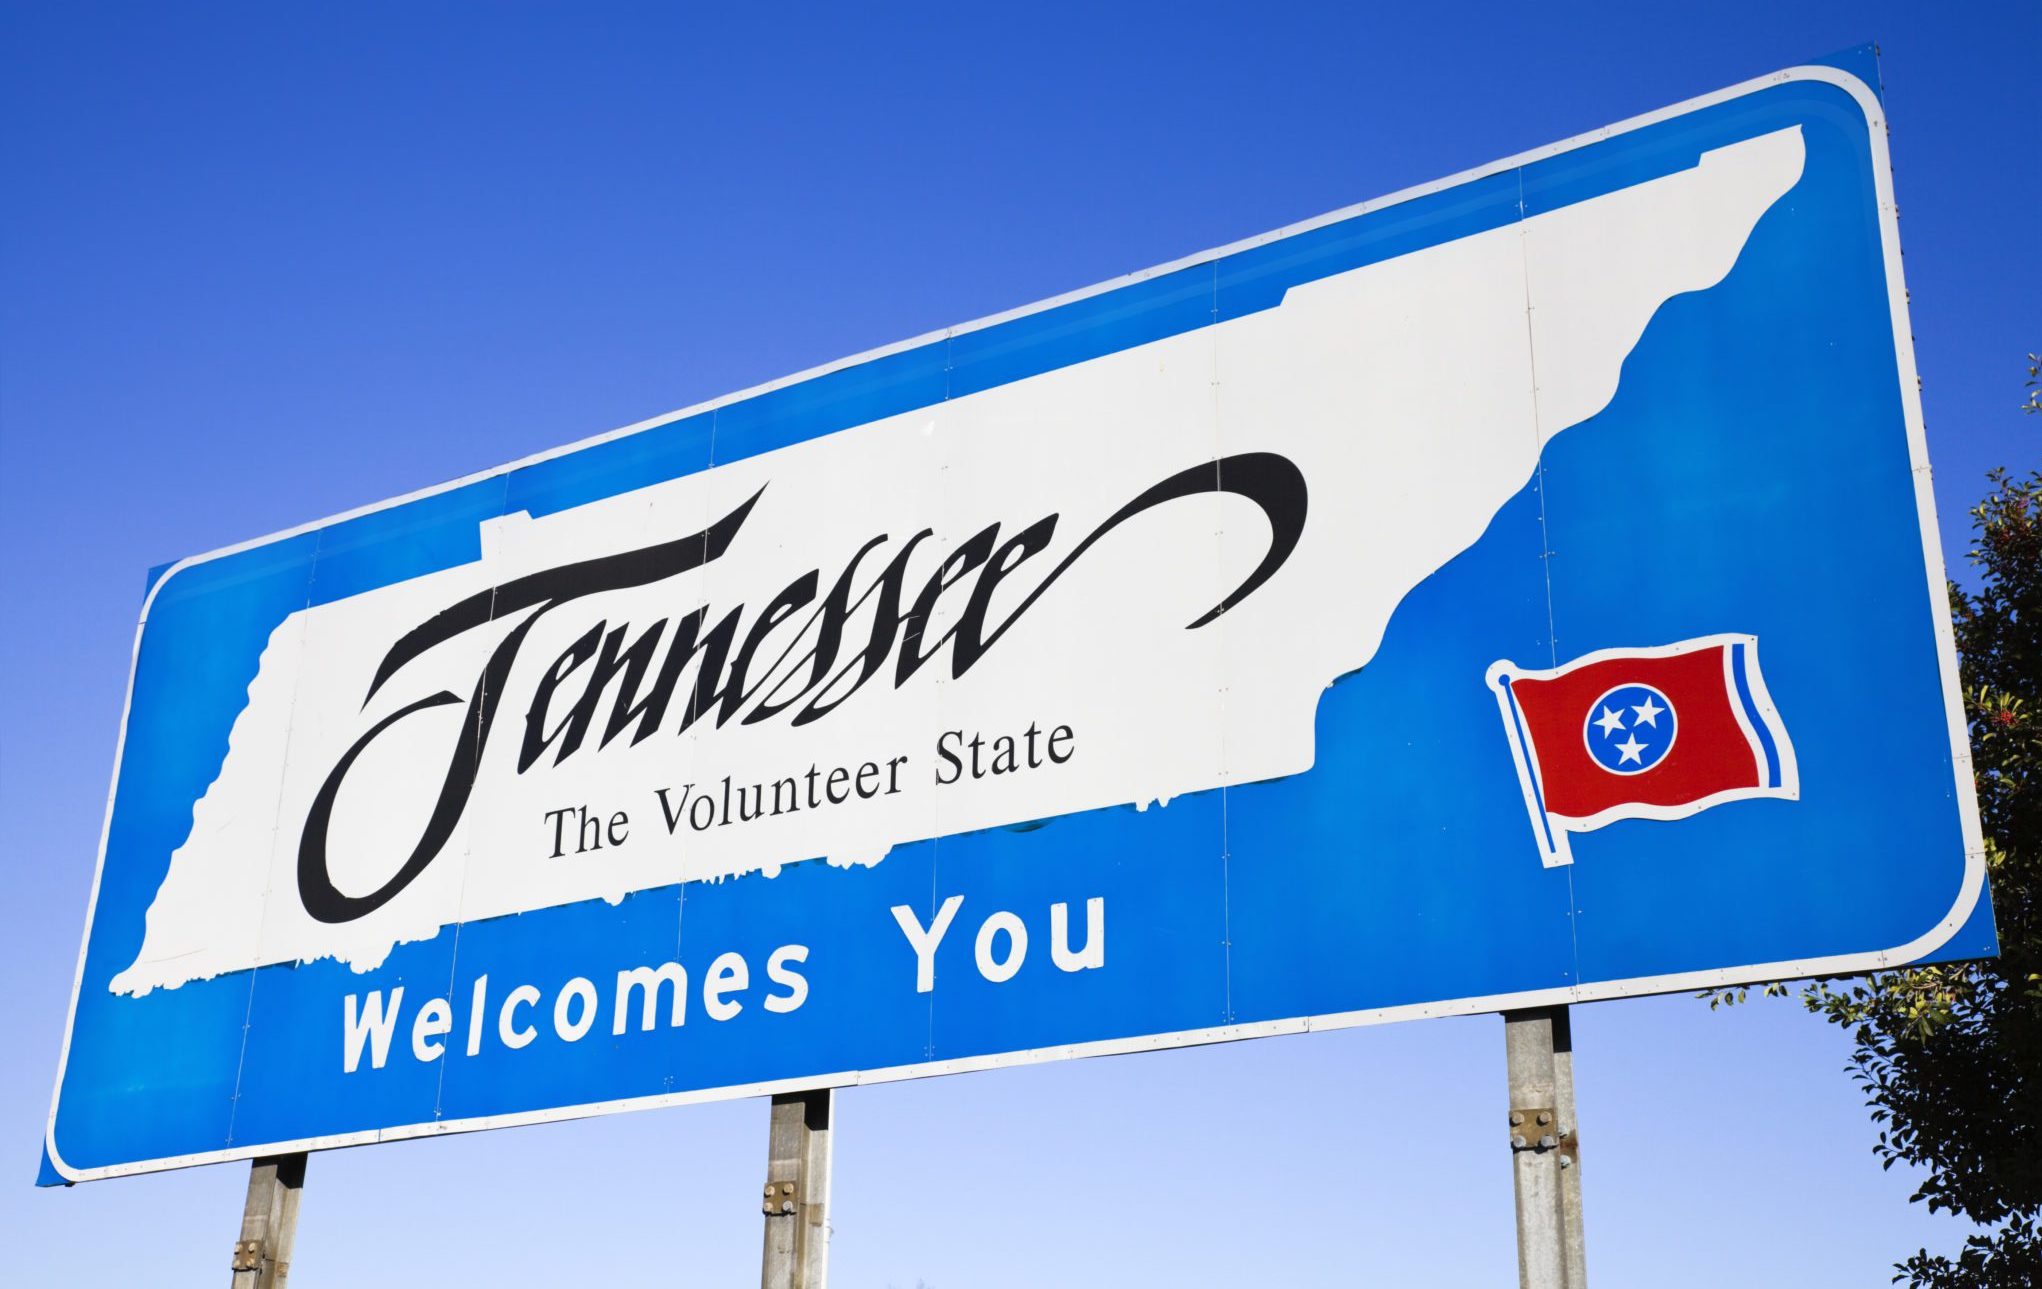 Welcome,To,Tennessee,-,Road,Sign,On,The,Highway.